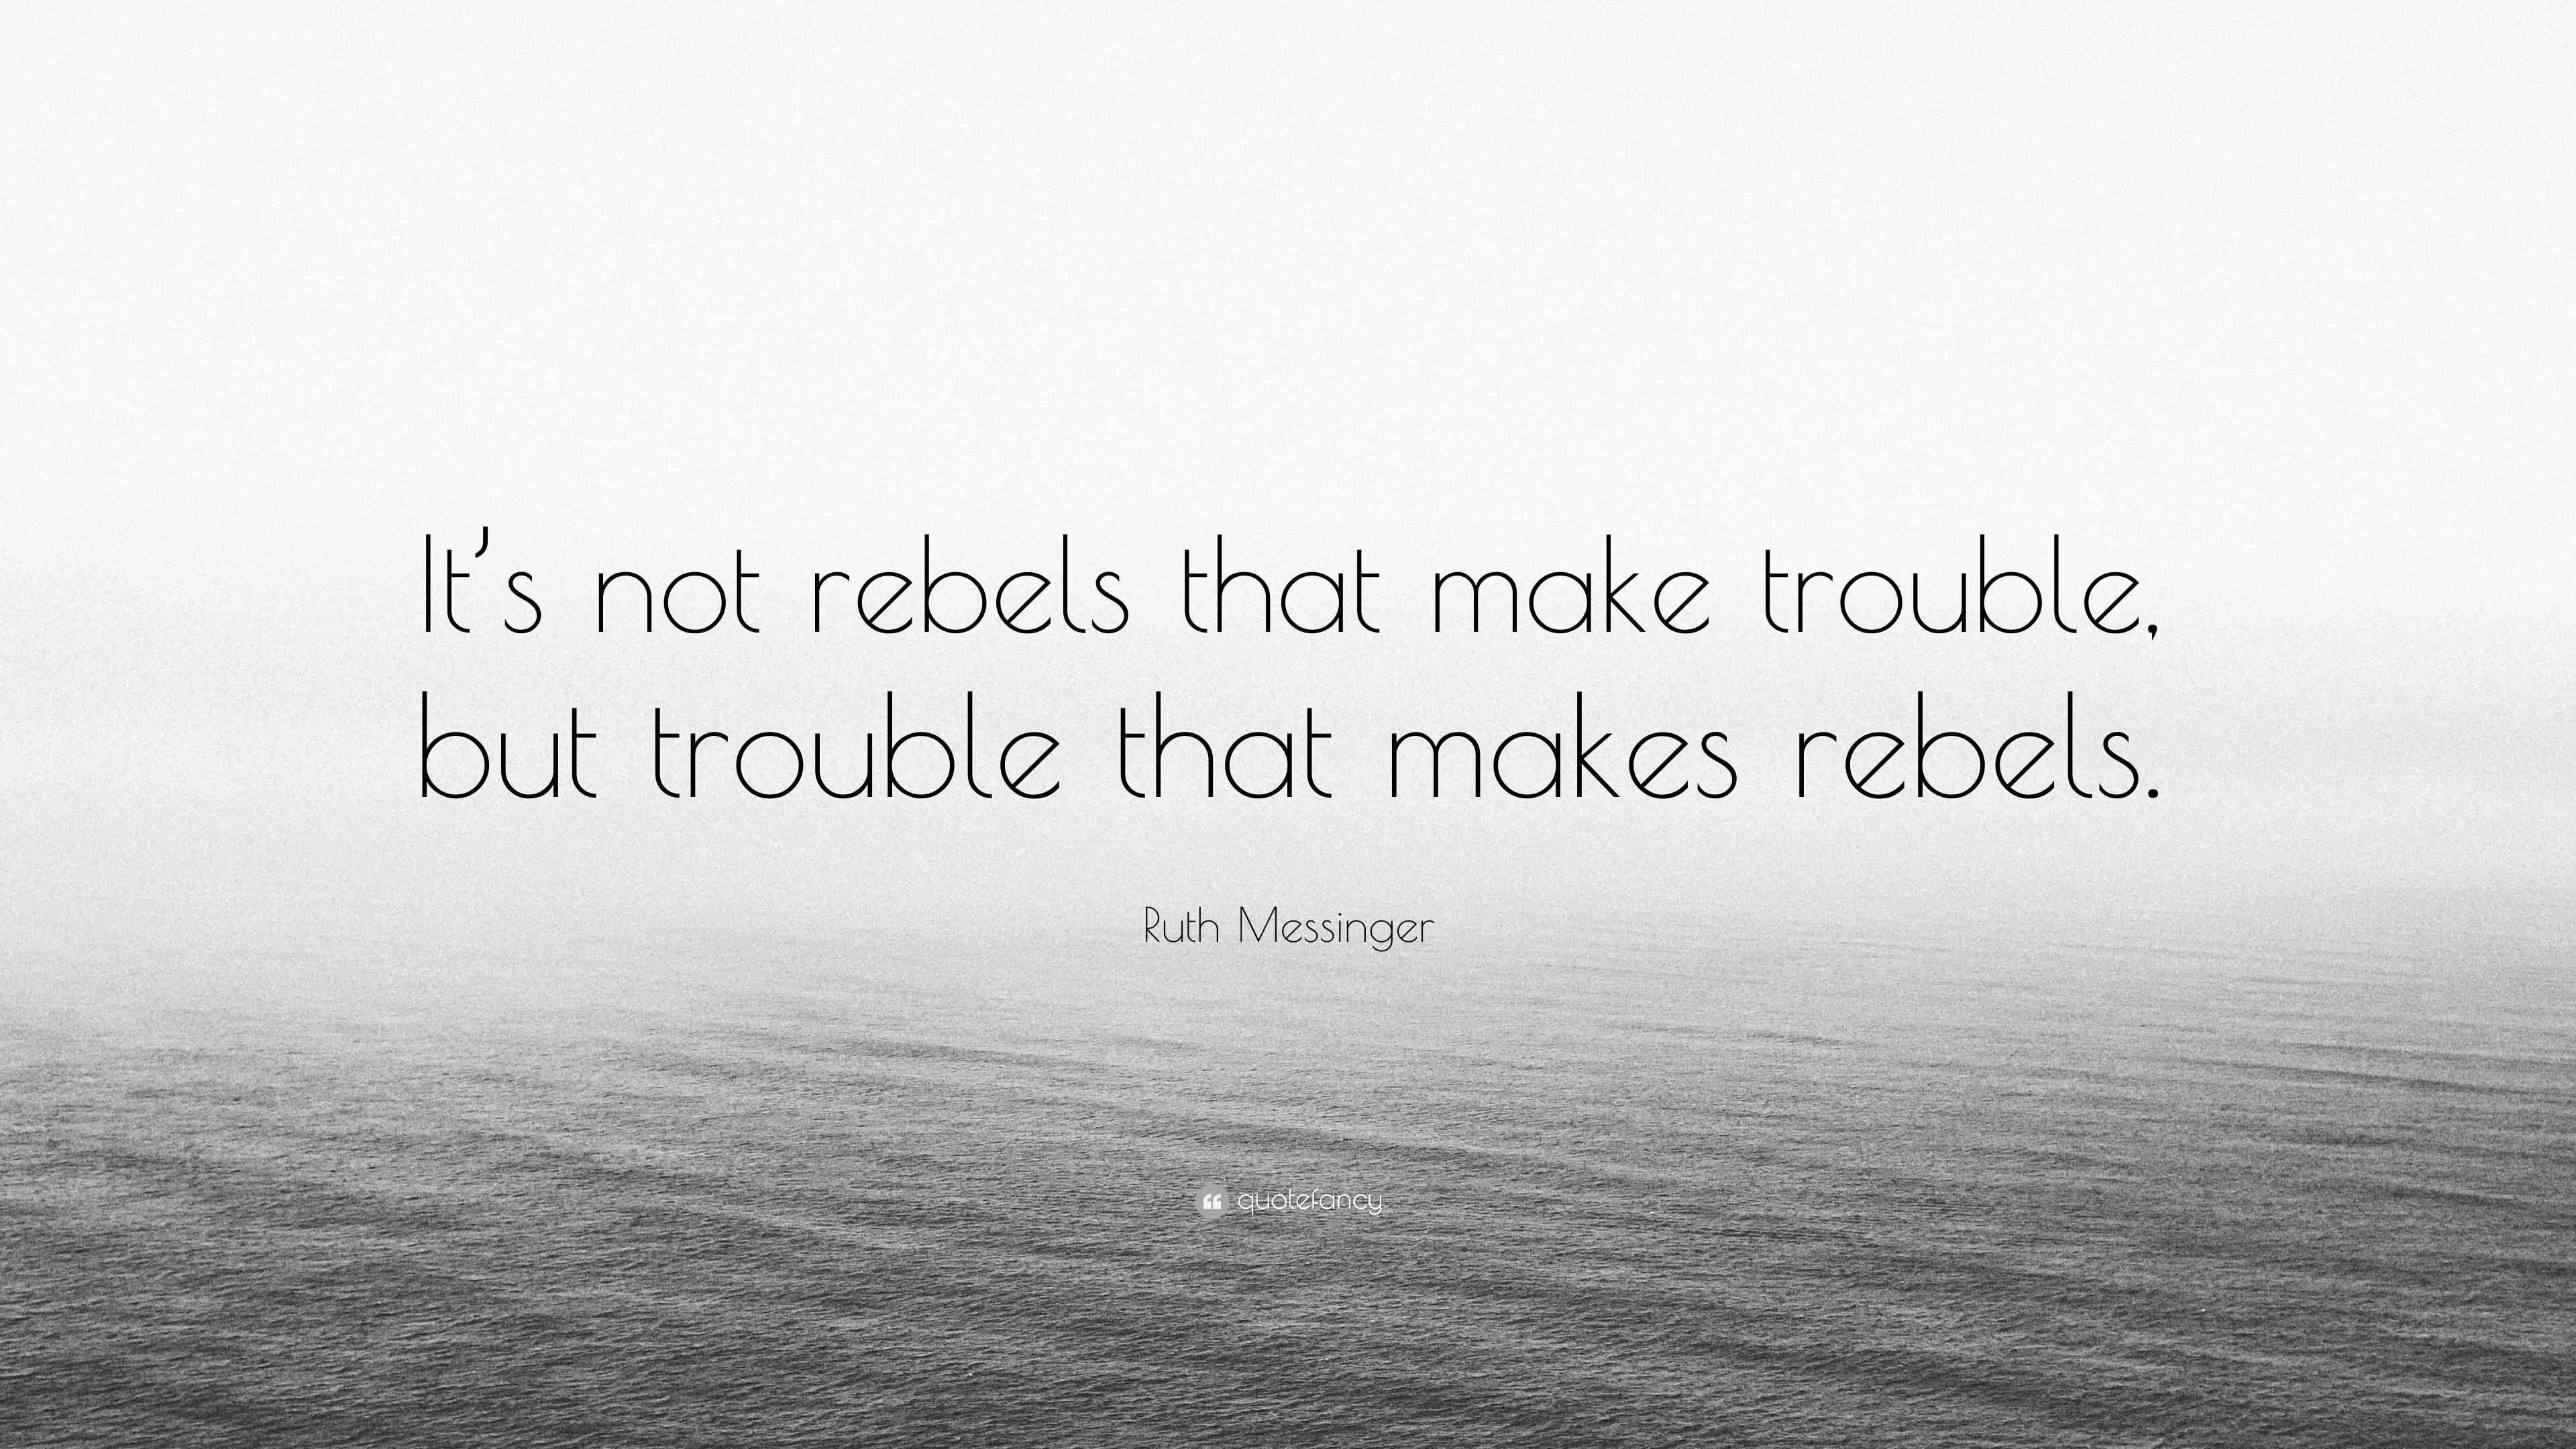 5226477-Ruth-Messinger-Quote-It-s-not-rebels-that-make-trouble-but-trouble.jpg